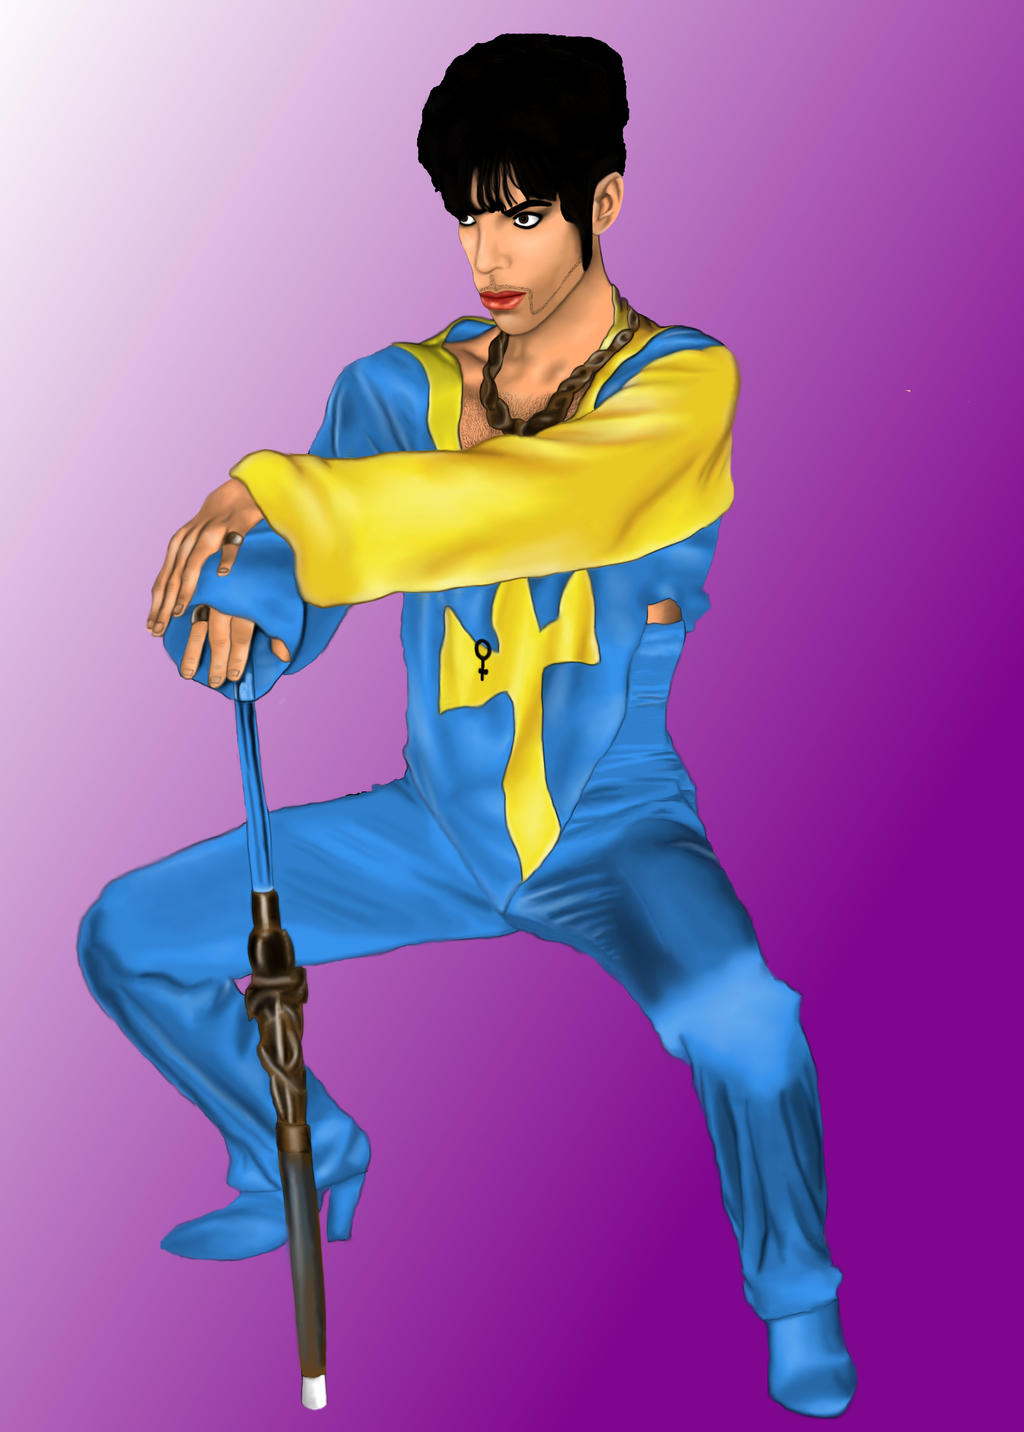 The artist formerly known as Prince - drawing by Vanessa0100 on DeviantArt